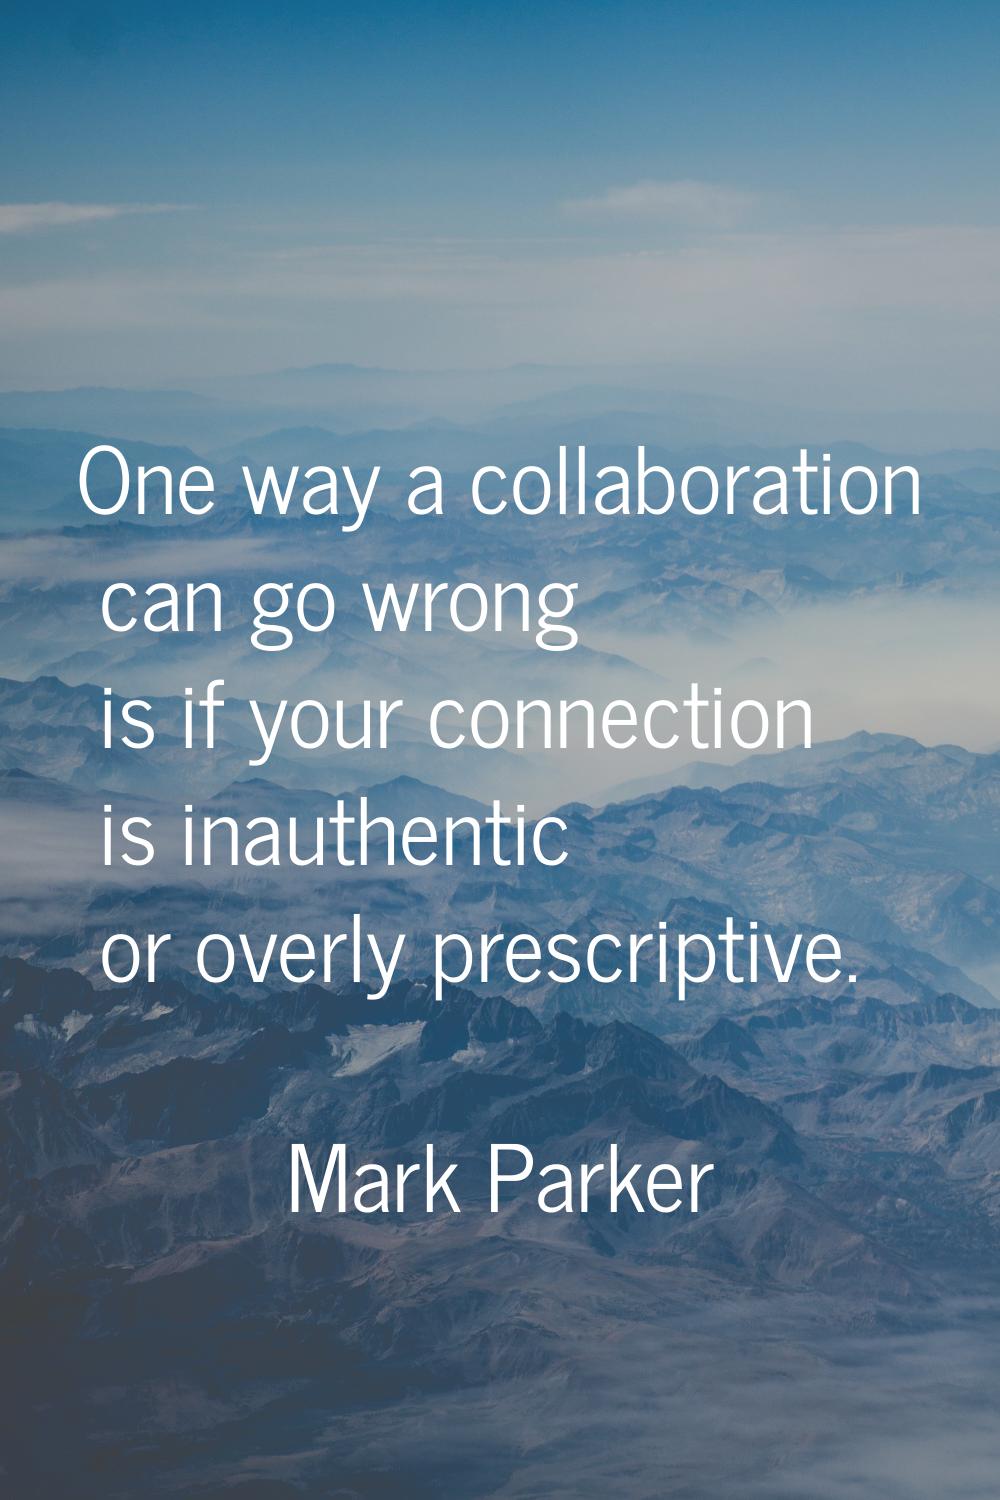 One way a collaboration can go wrong is if your connection is inauthentic or overly prescriptive.